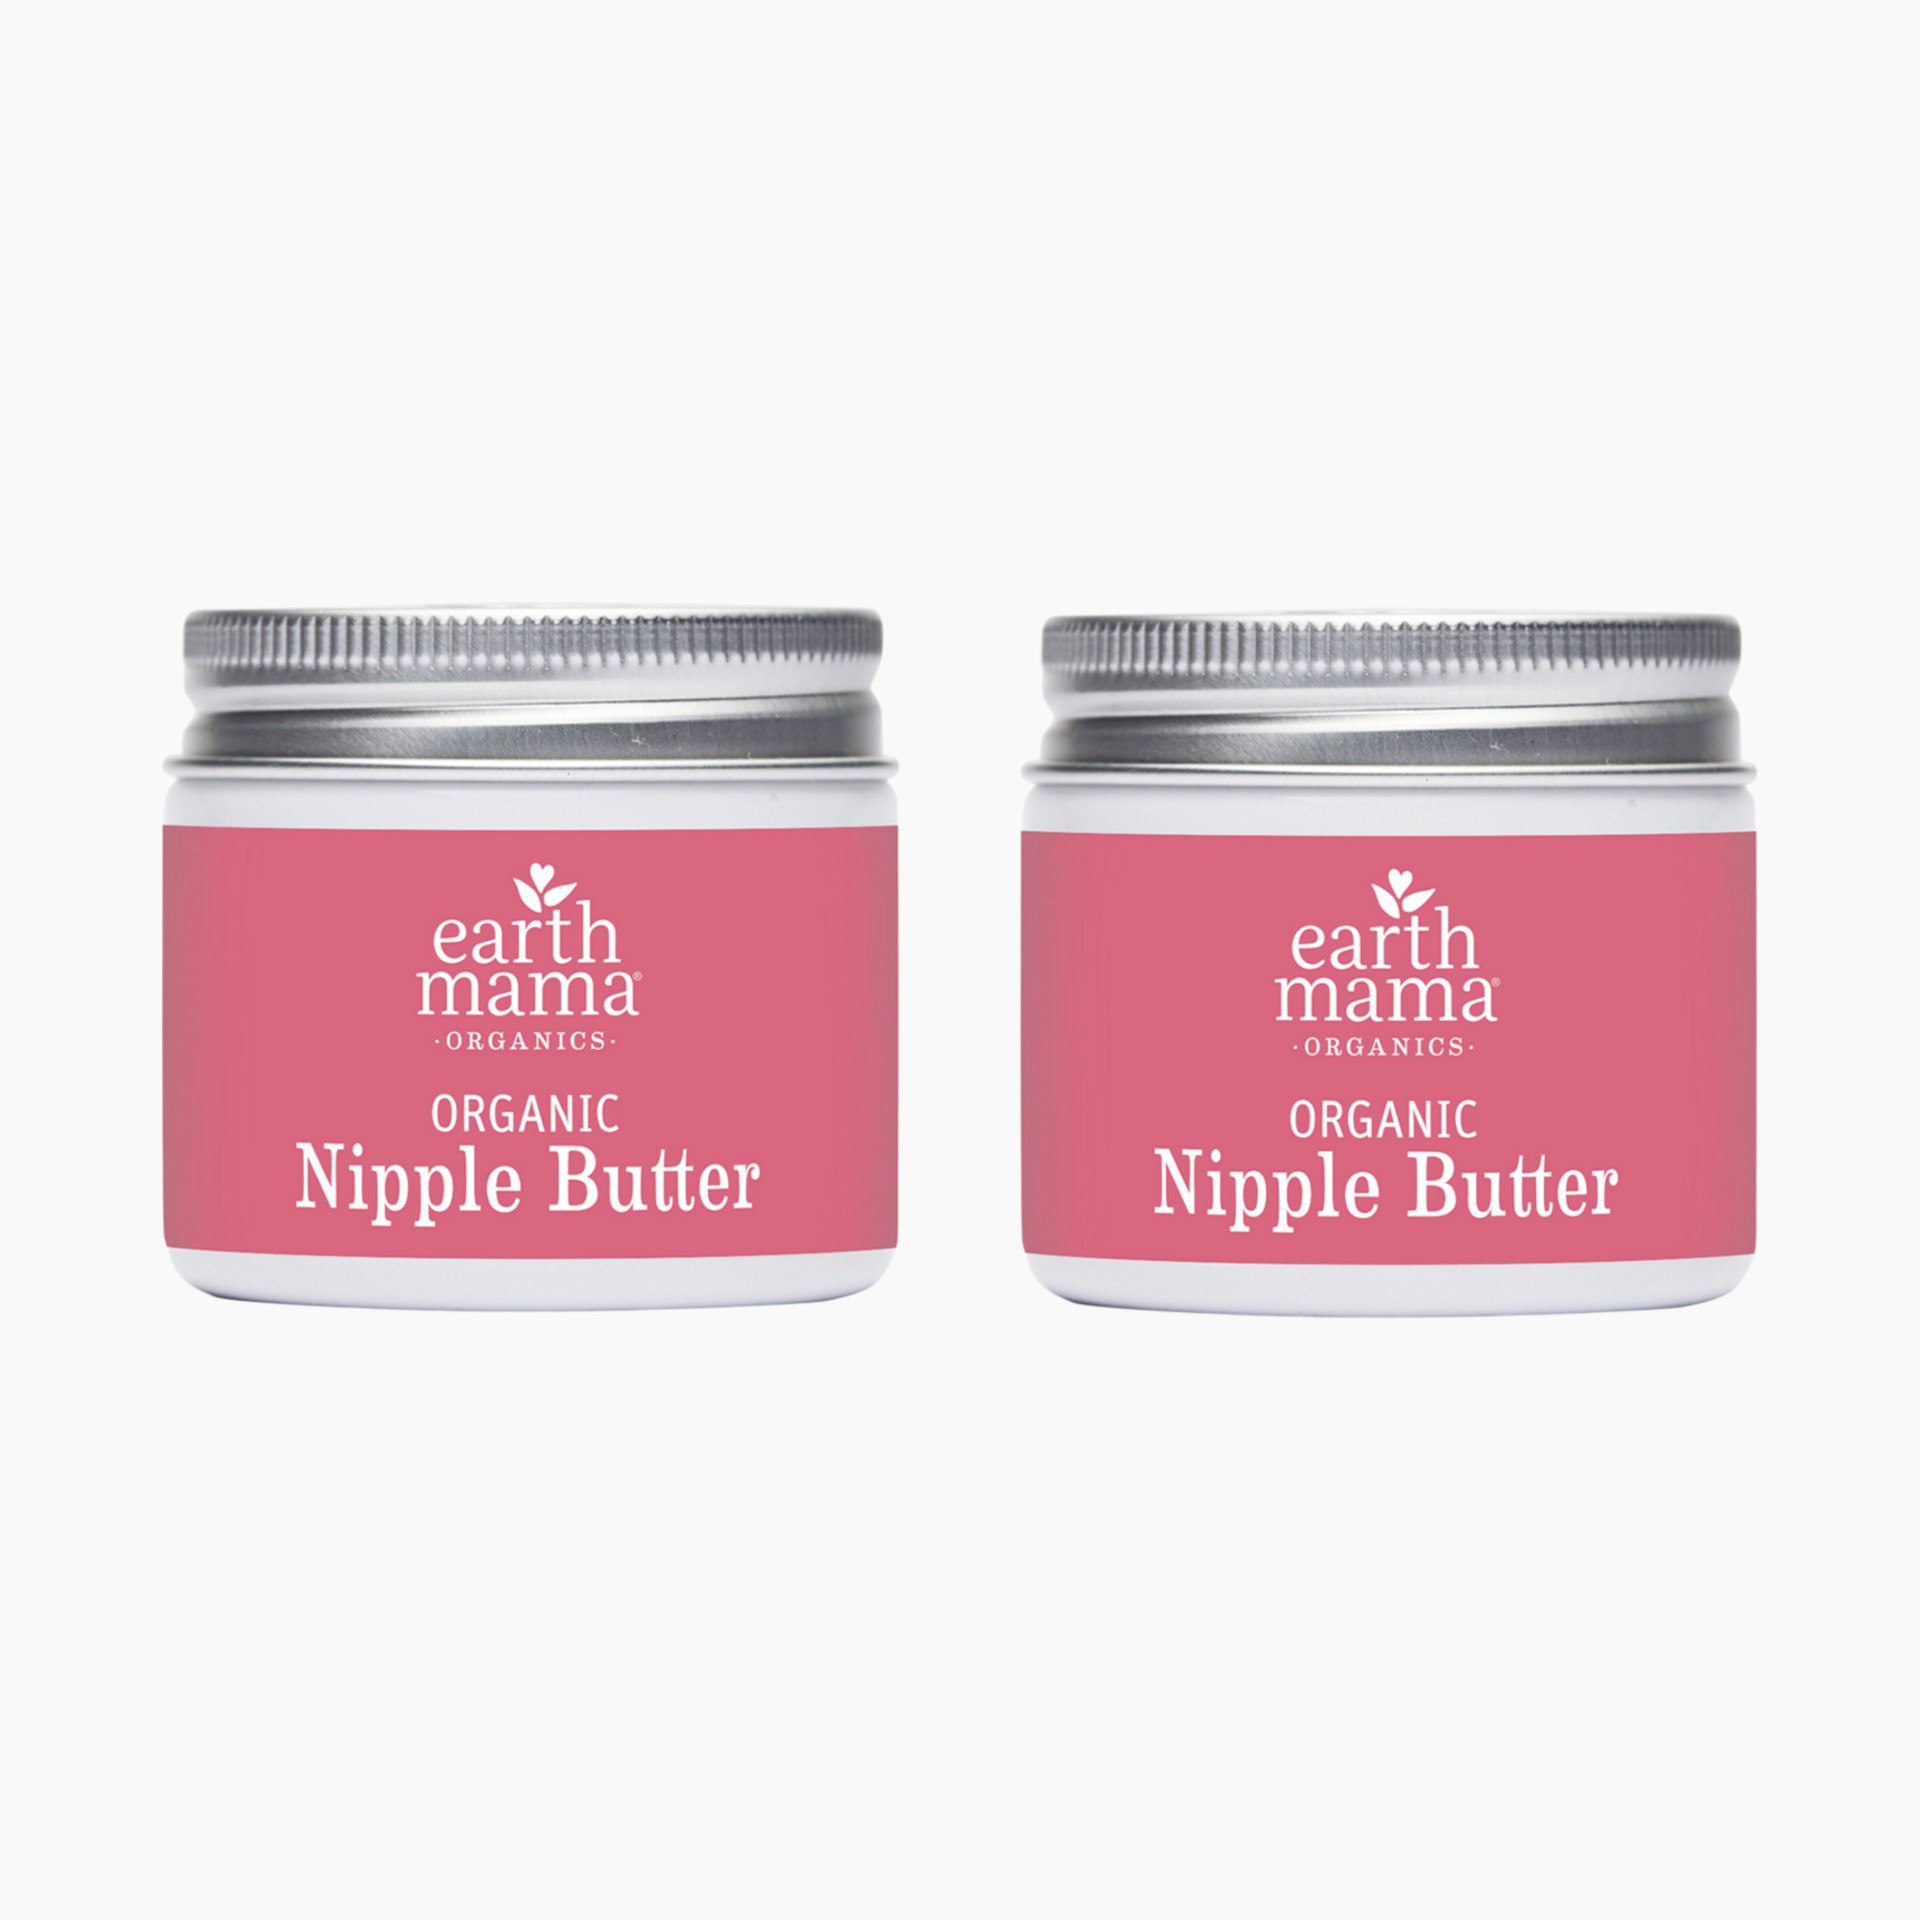  Organic Nipple Butter Breastfeeding Cream by Mother To Mother   Lanolin-Free, Safe for Nursing & Dry Skin, Non-GMO Project Verified, 2 FL  oz, White, 2 Ounce : Baby